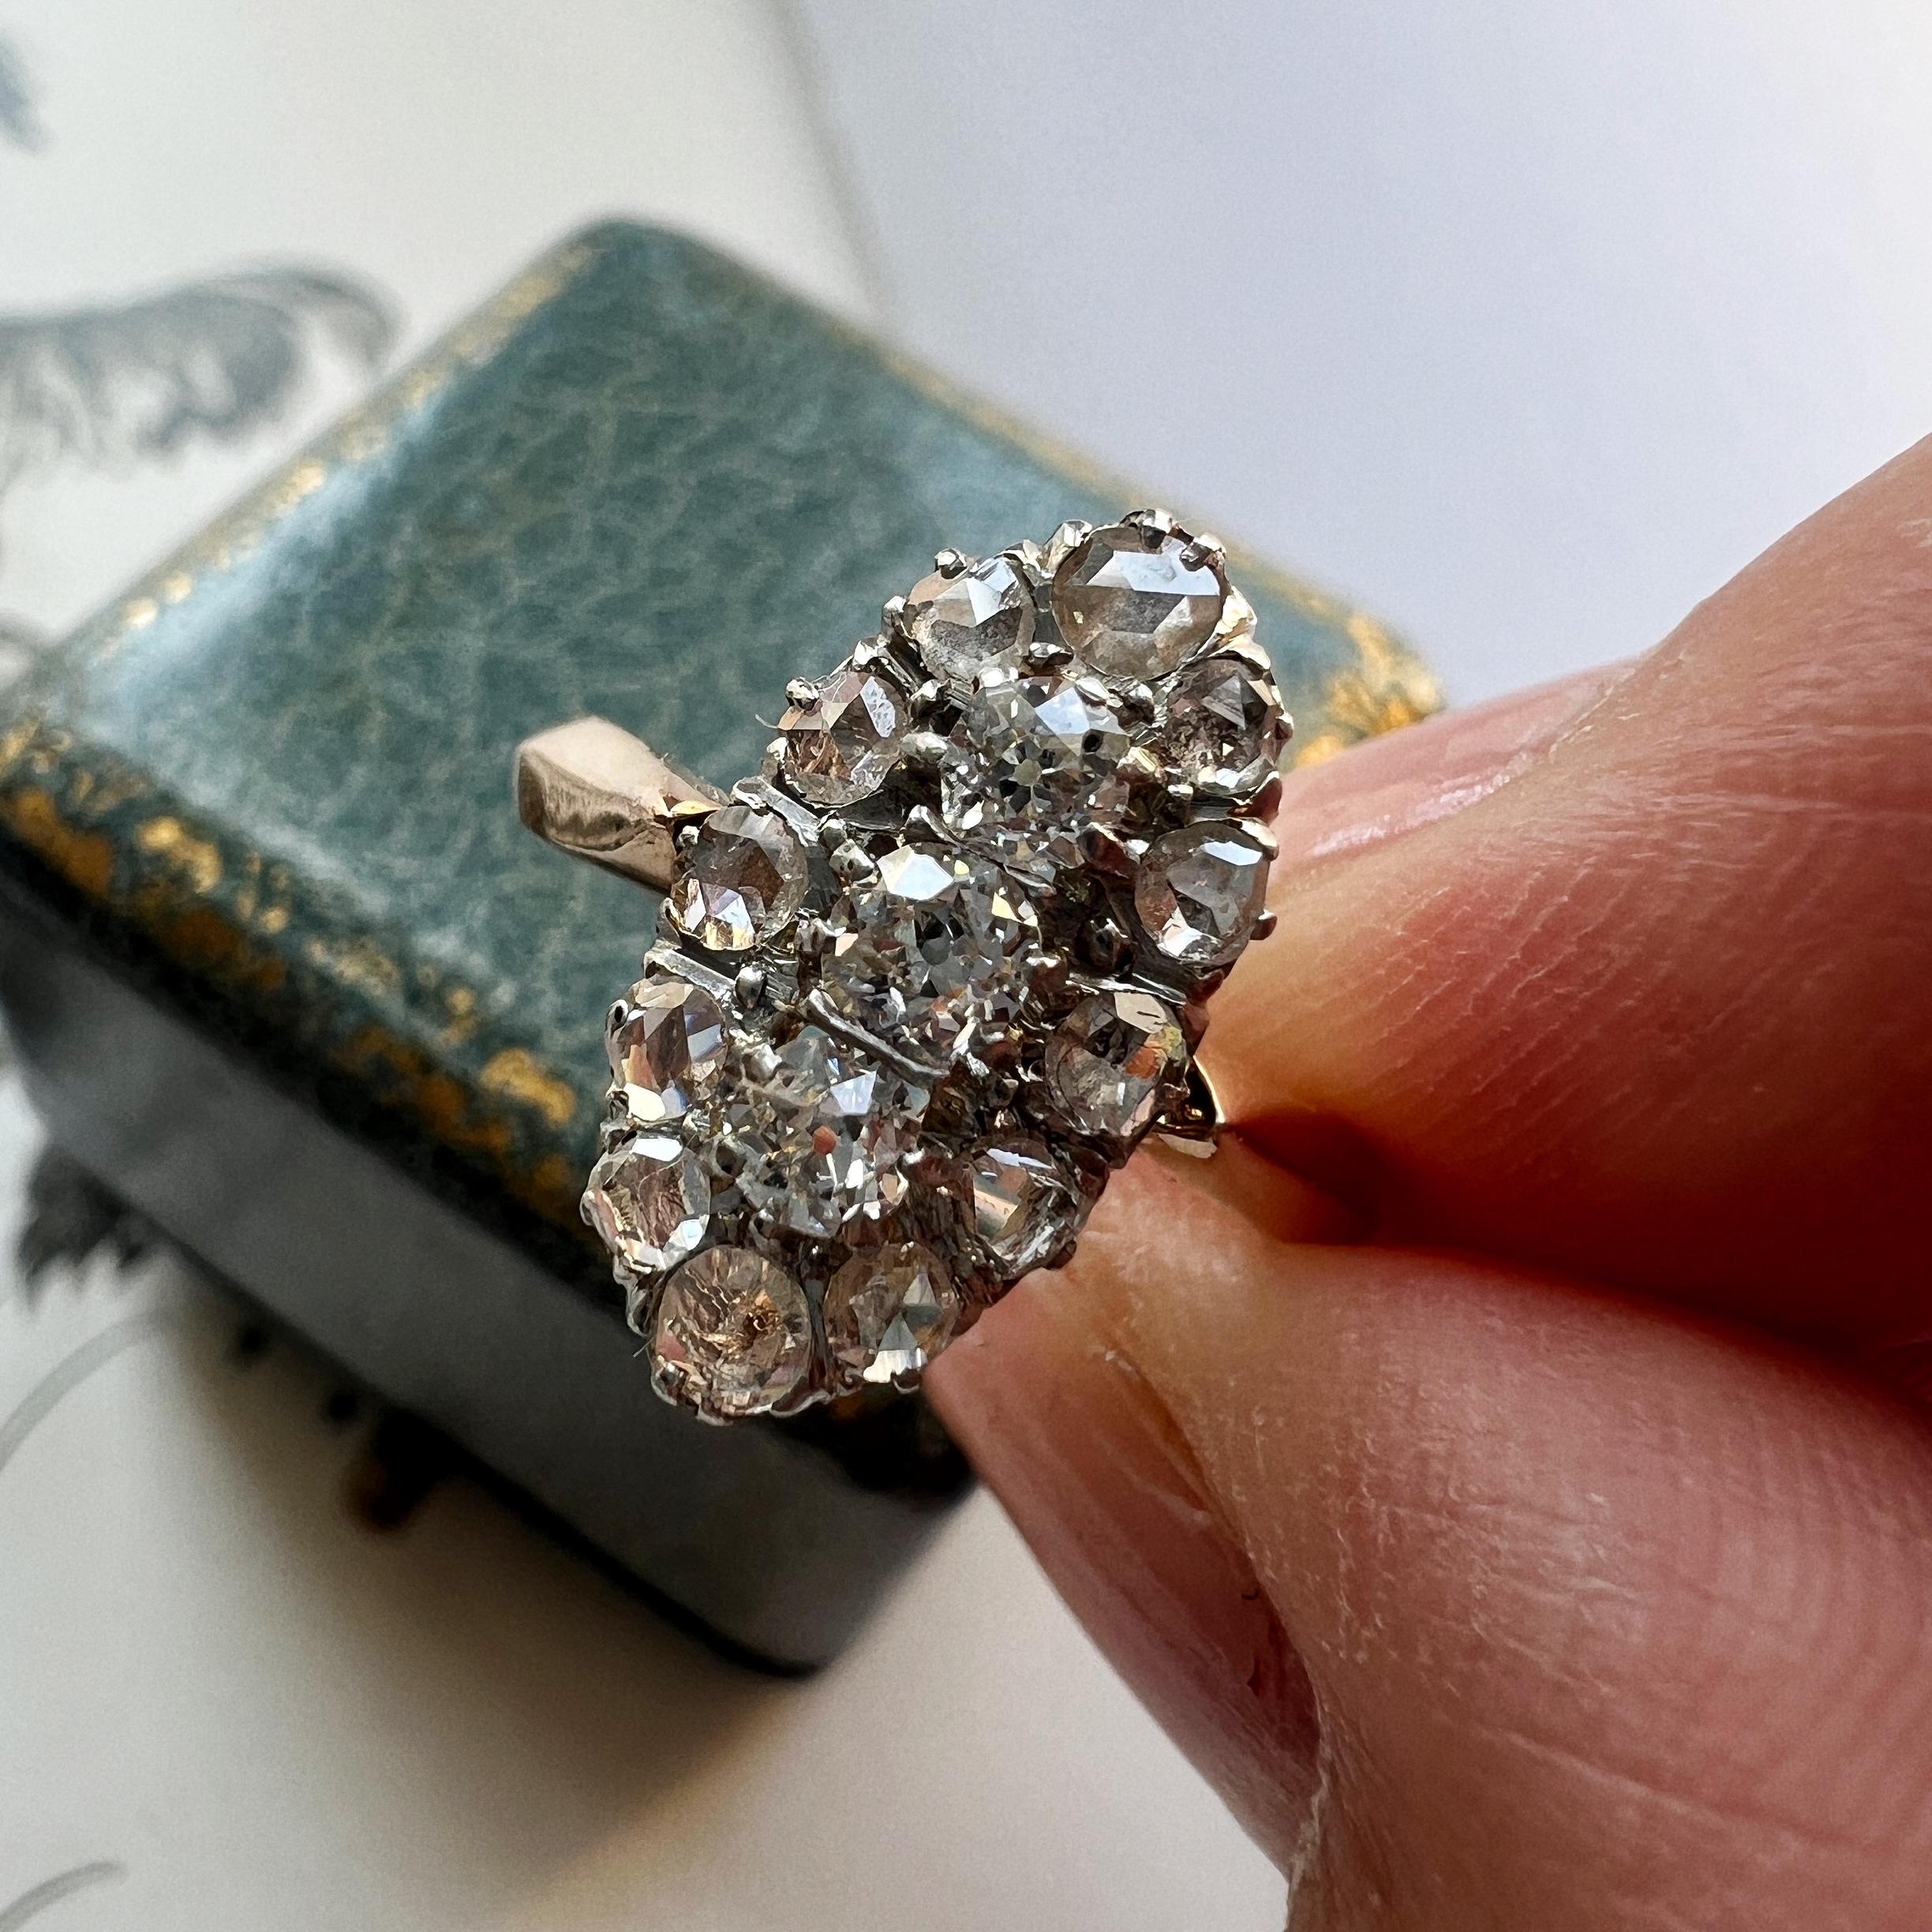 For sale an antique ring from the Victorian era. The ring features a marquise ring head that is fully pave set with sparkling diamonds. The central three diamonds are old mine cut, weighing approximately 0.3ct in total, and they are surrounded by 12